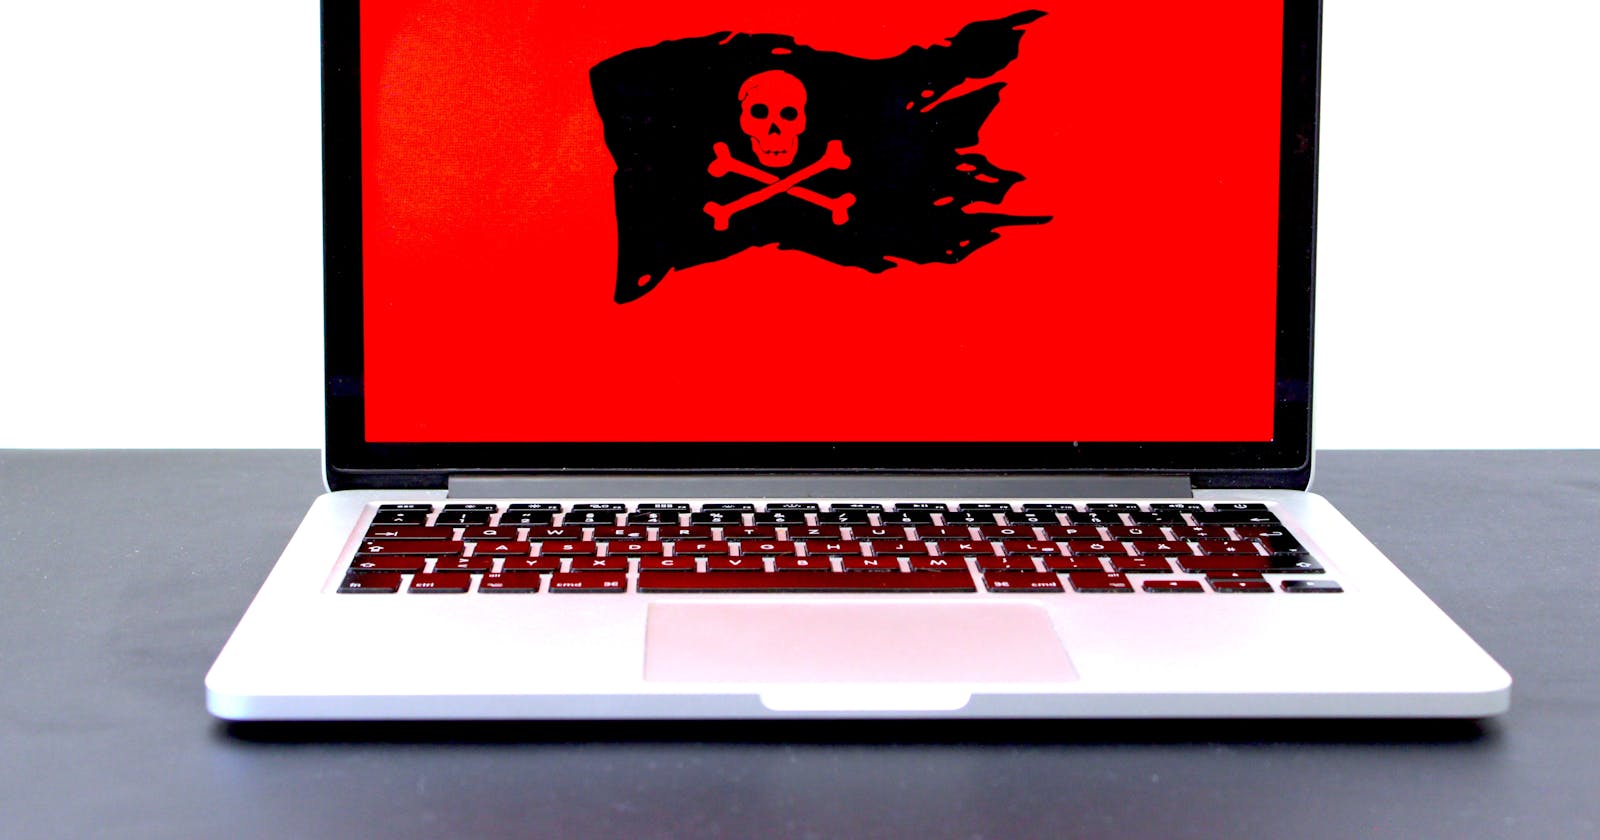 Ways to Prevent an Advanced Persistent Threat (APT) Ransomware attack?